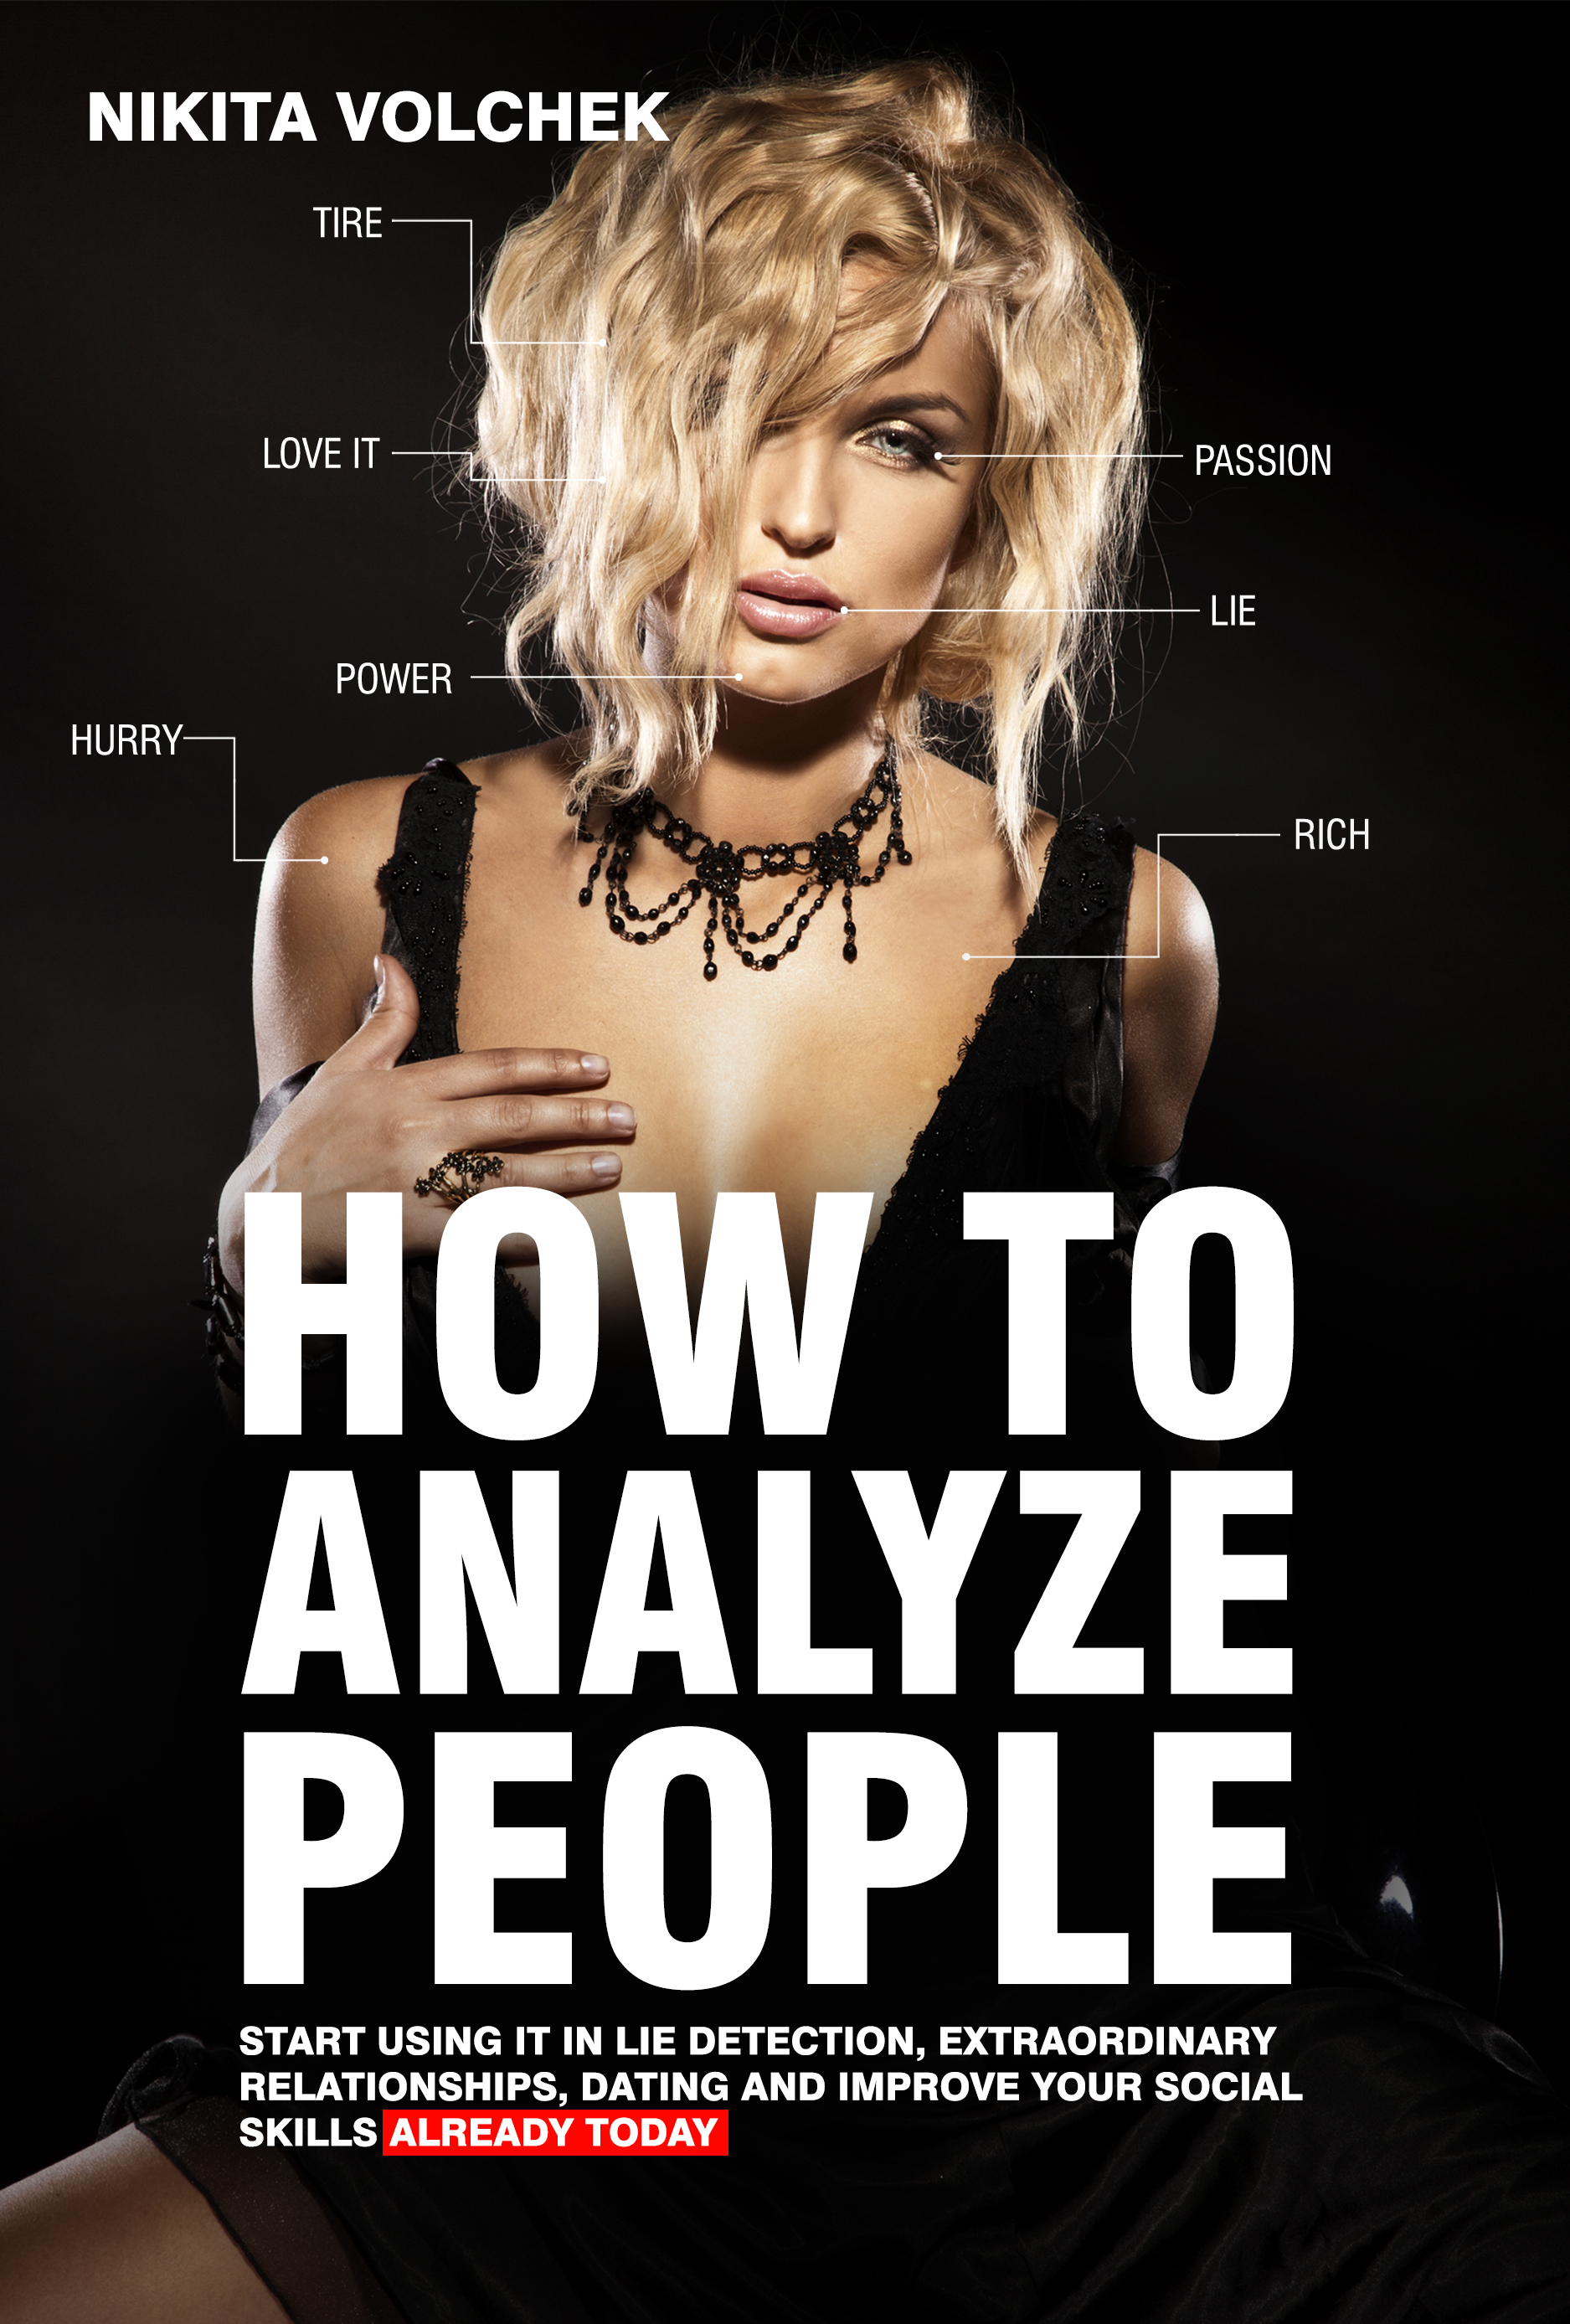 FREE: How to Analyze People: The Ultimate Guide to Analyze People. Start Using it in Lie Detection, Extraordinary Relationships, Dating and Improve your Social Skills Already Today by Nikita